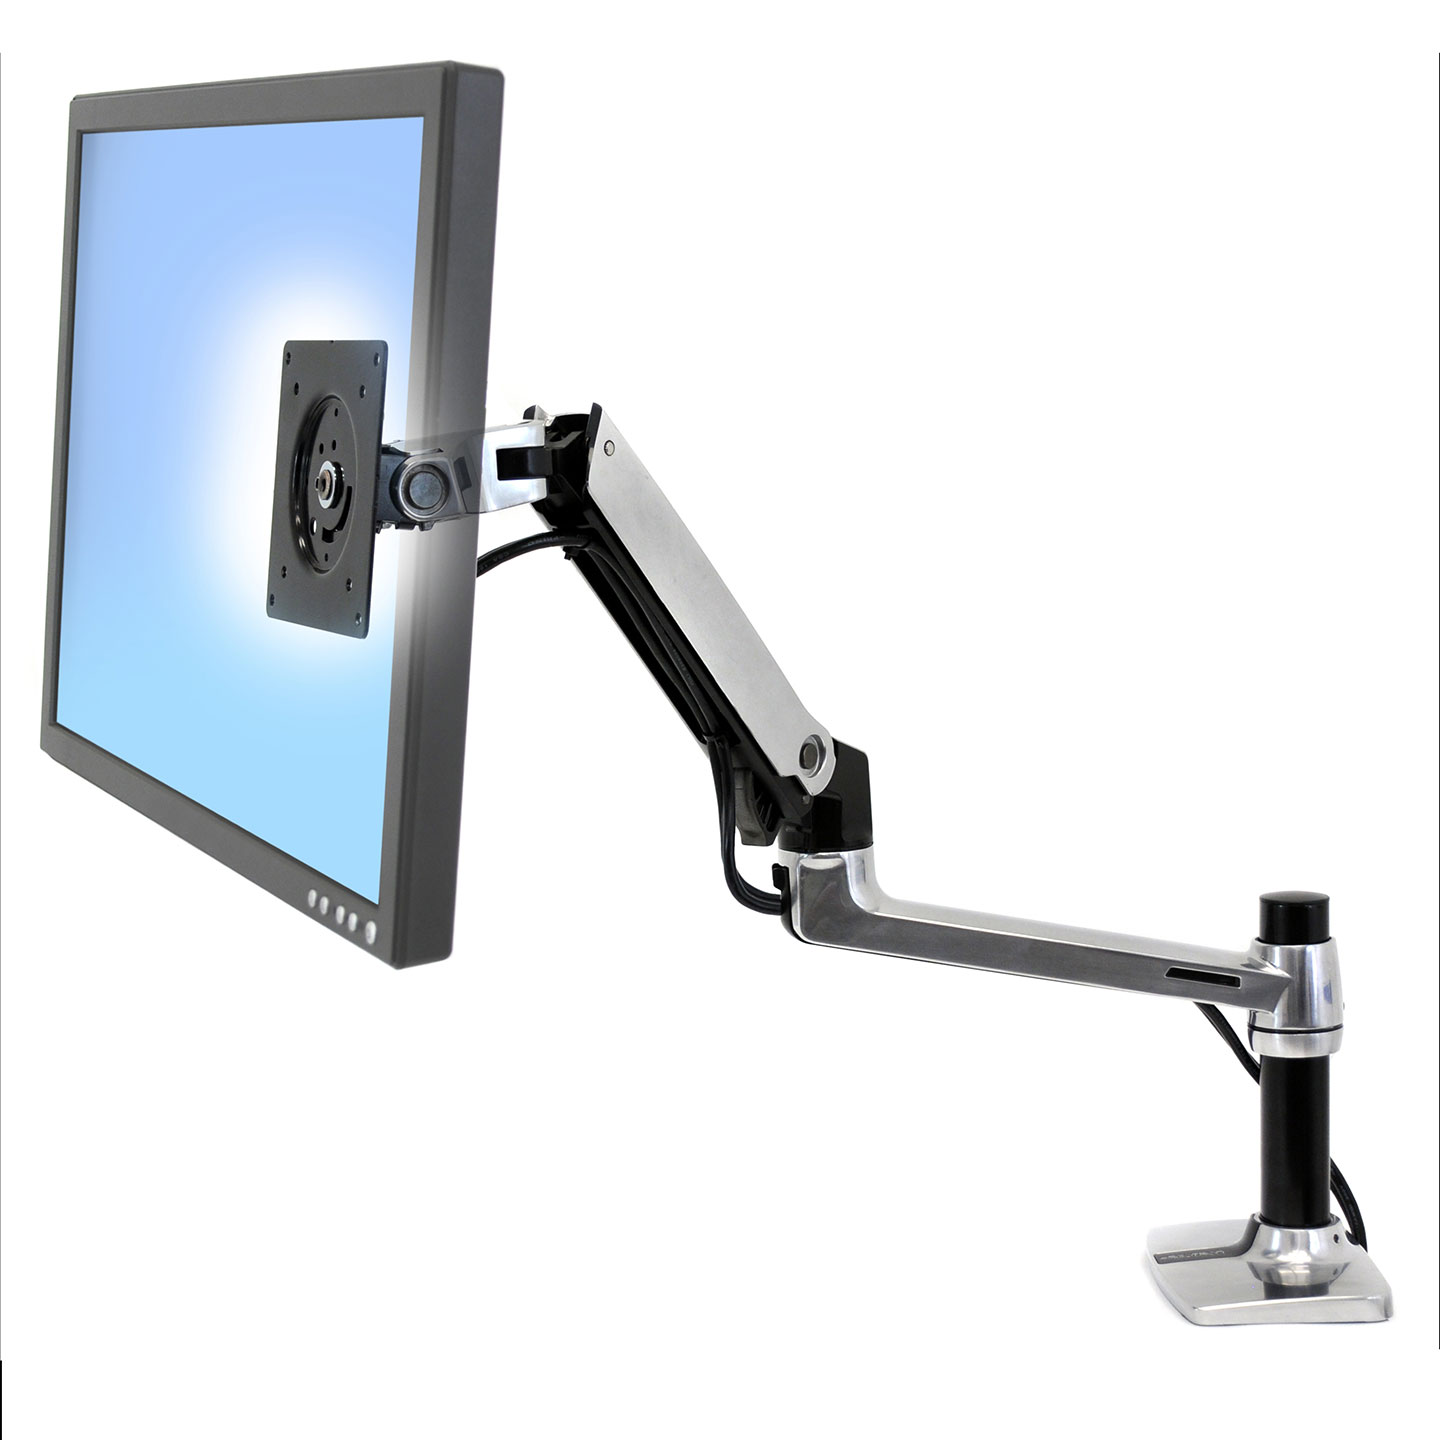 Haworth Monitor Arm Accessories with full motion and steel 